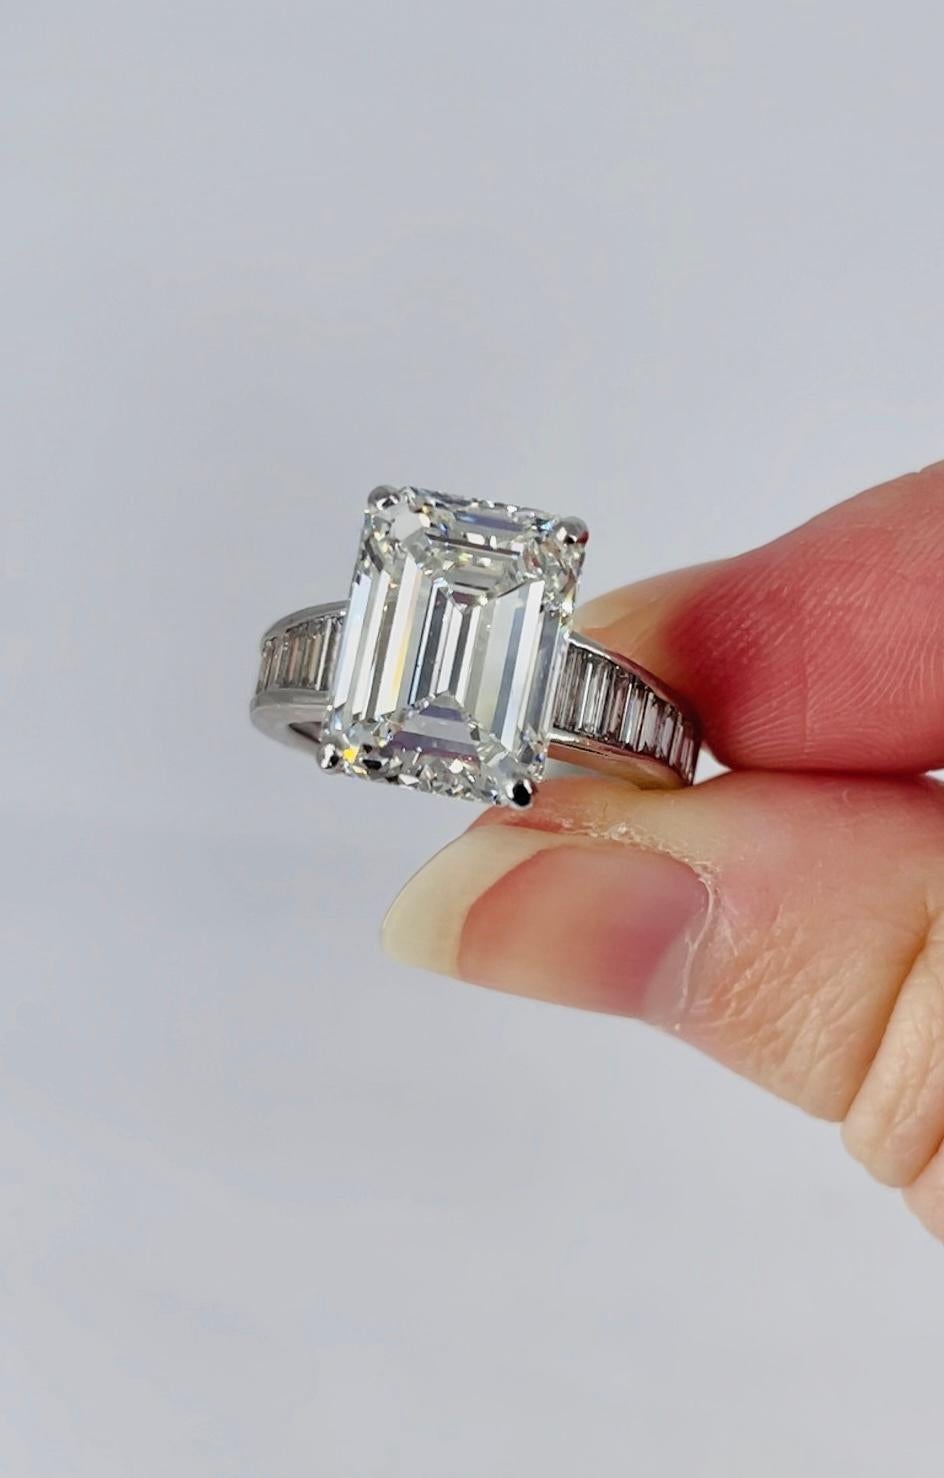 This one of a kind engagement ring is a unique statement piece by J. Birnbach. The ring features a 6.35 carat GIA certified emerald cut diamond,   I color and VVS2 clarity as described by report #5234160772. The diamond is a finger flattering